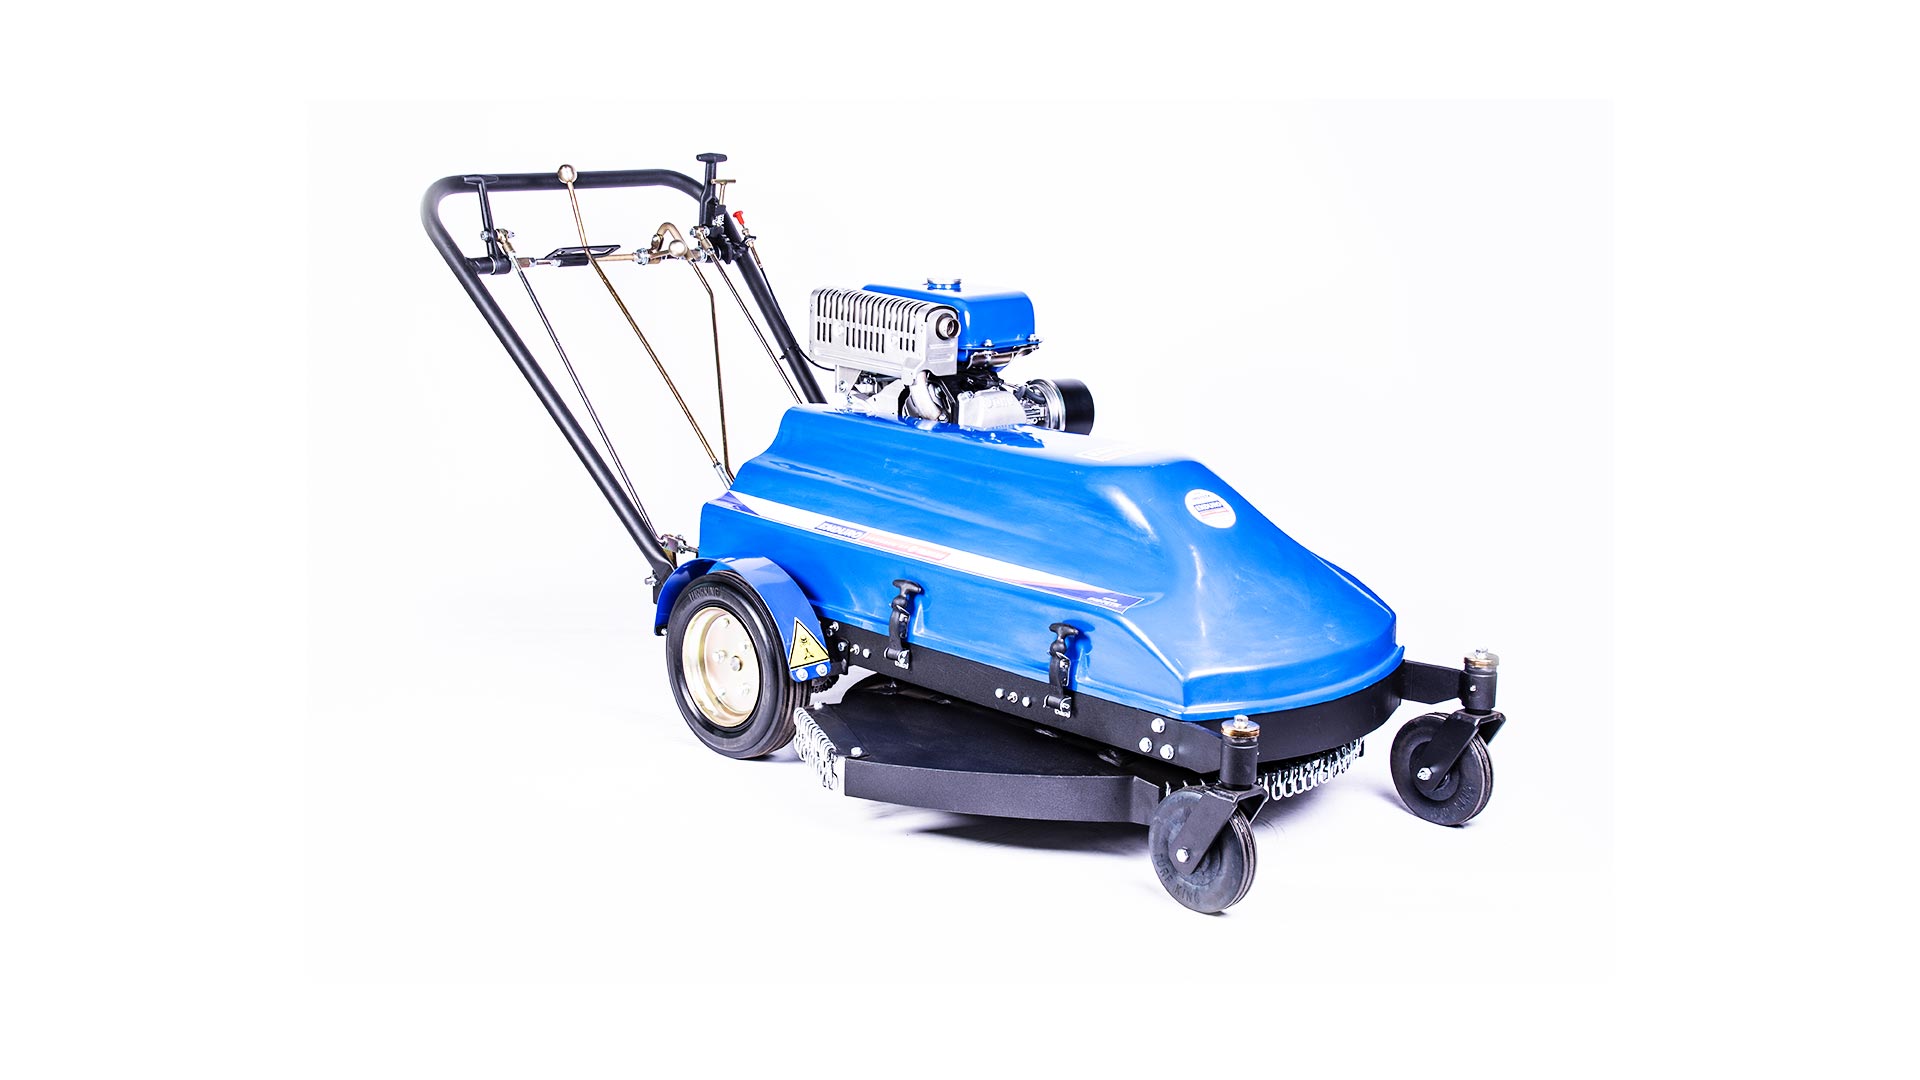 YAMAHA IND75TK LAWNMOWERS  - METICULOUSLY CRAFTED:
The self propelled industrial type lawnmower driven by Yamaha’s most powerful MZ360, 2Hp engine fitted with a full cyclone filter. This two-speed locally and meticulously crafted grass-chomping machine boasts 750mm cut width by bar blade.